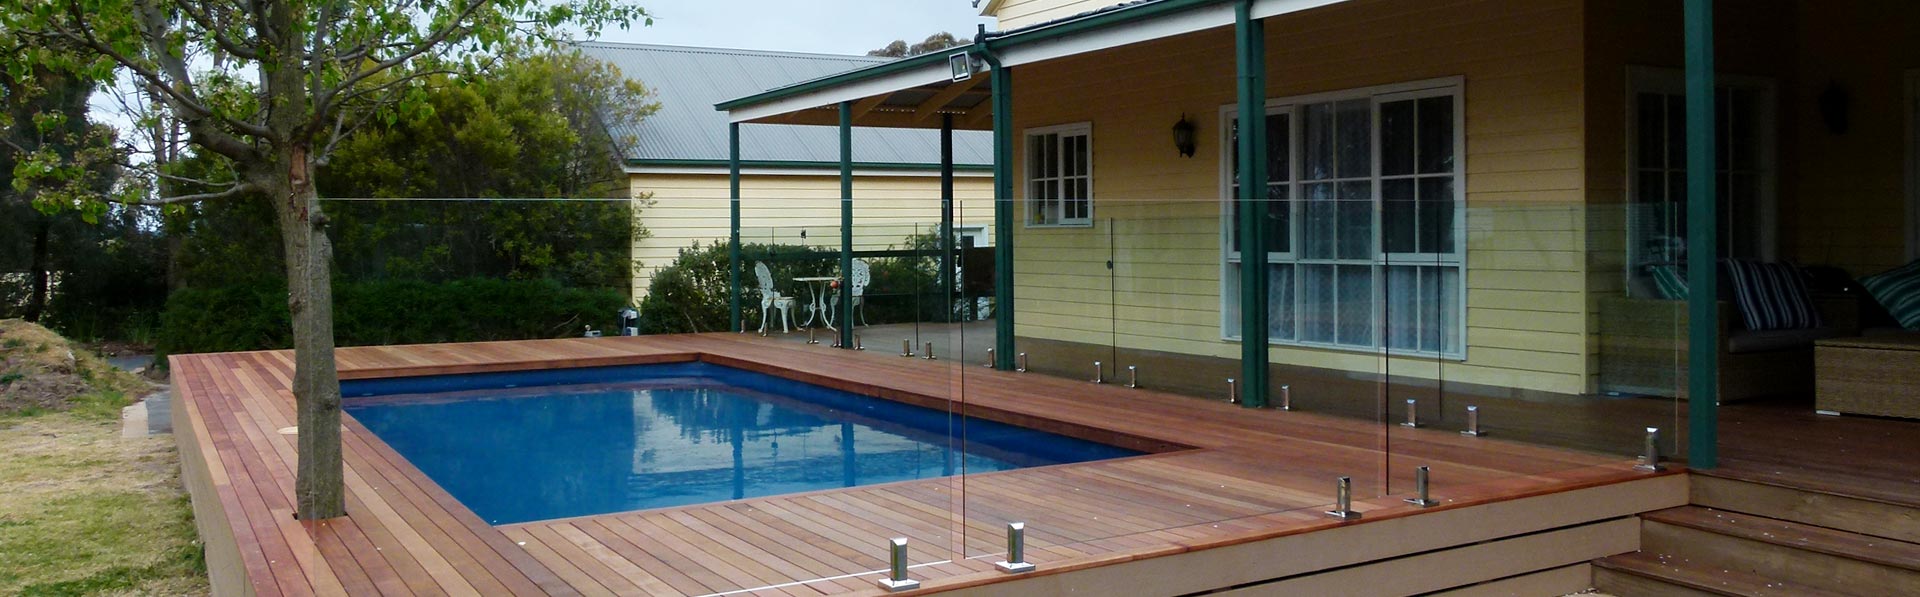 rectangle above ground pool with metal deck